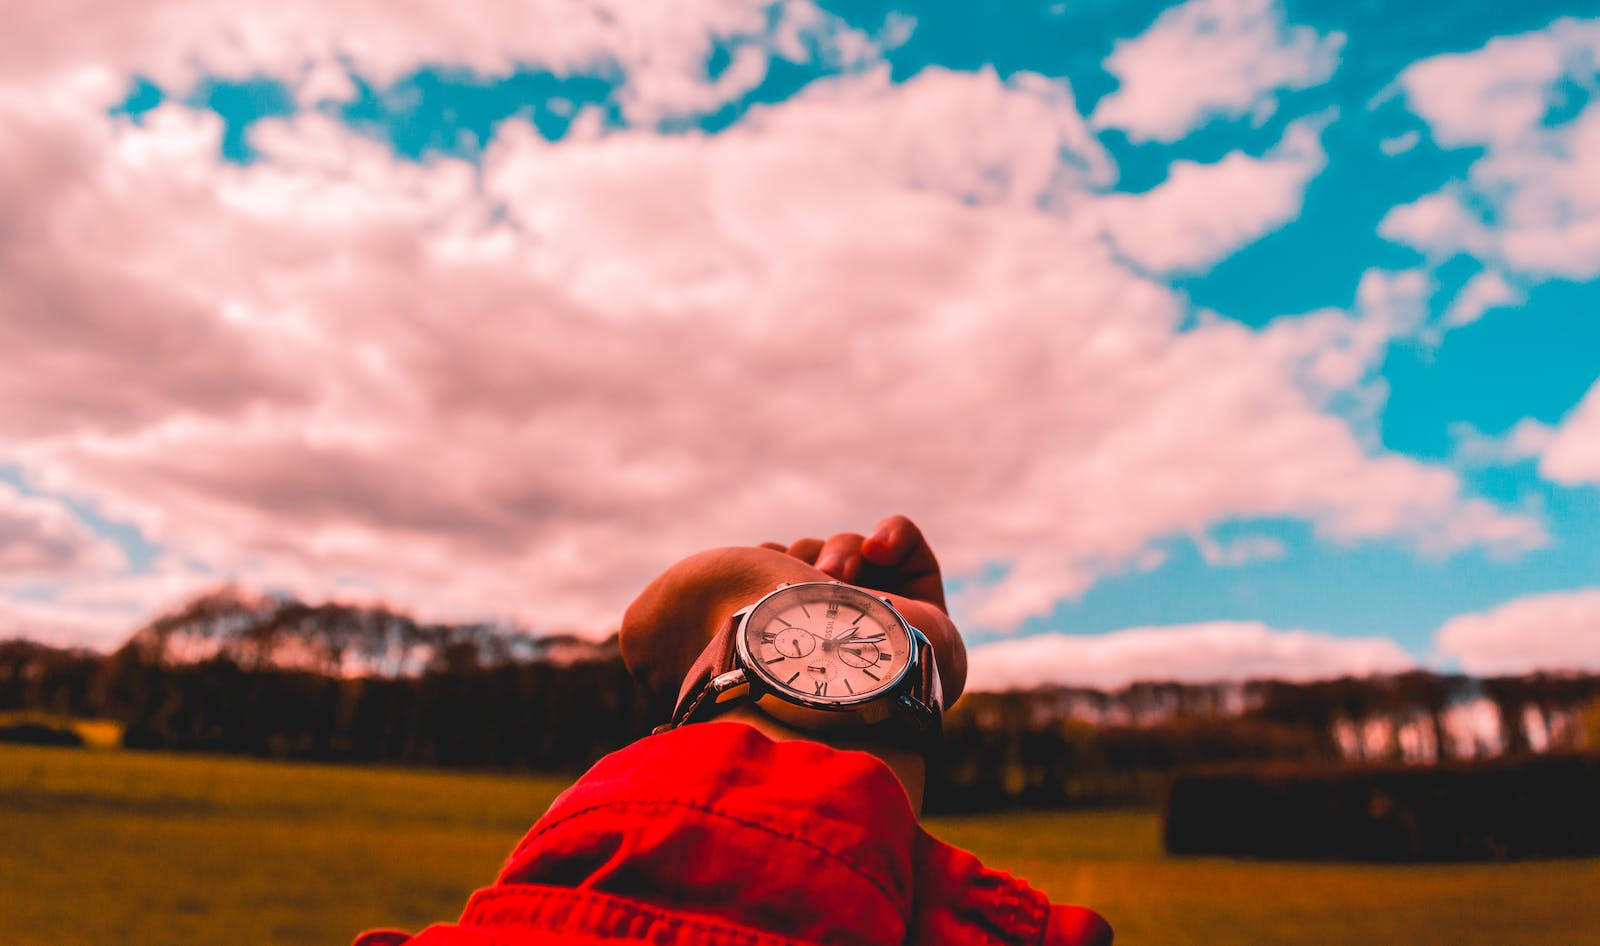 Time Wrist Watch And Sky Background